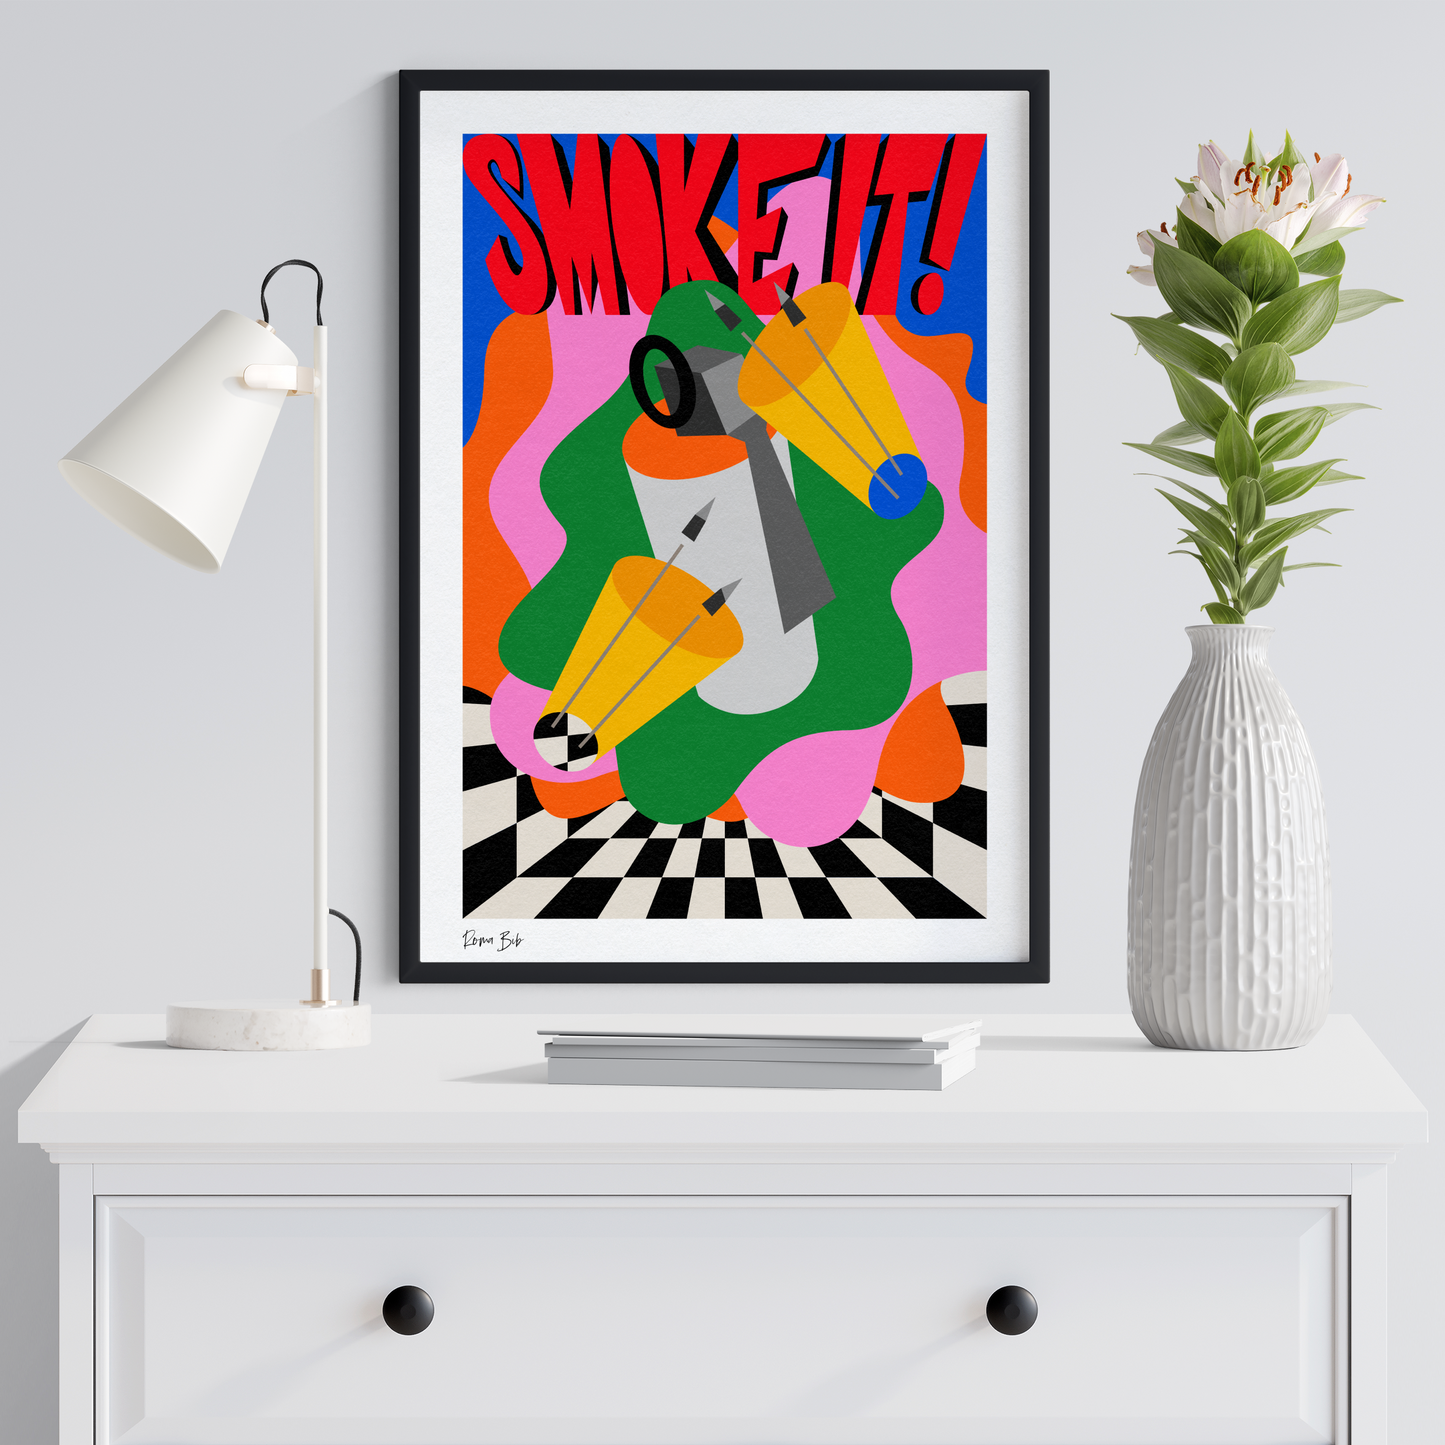 Counter Cubes: Smoke It Framed Print